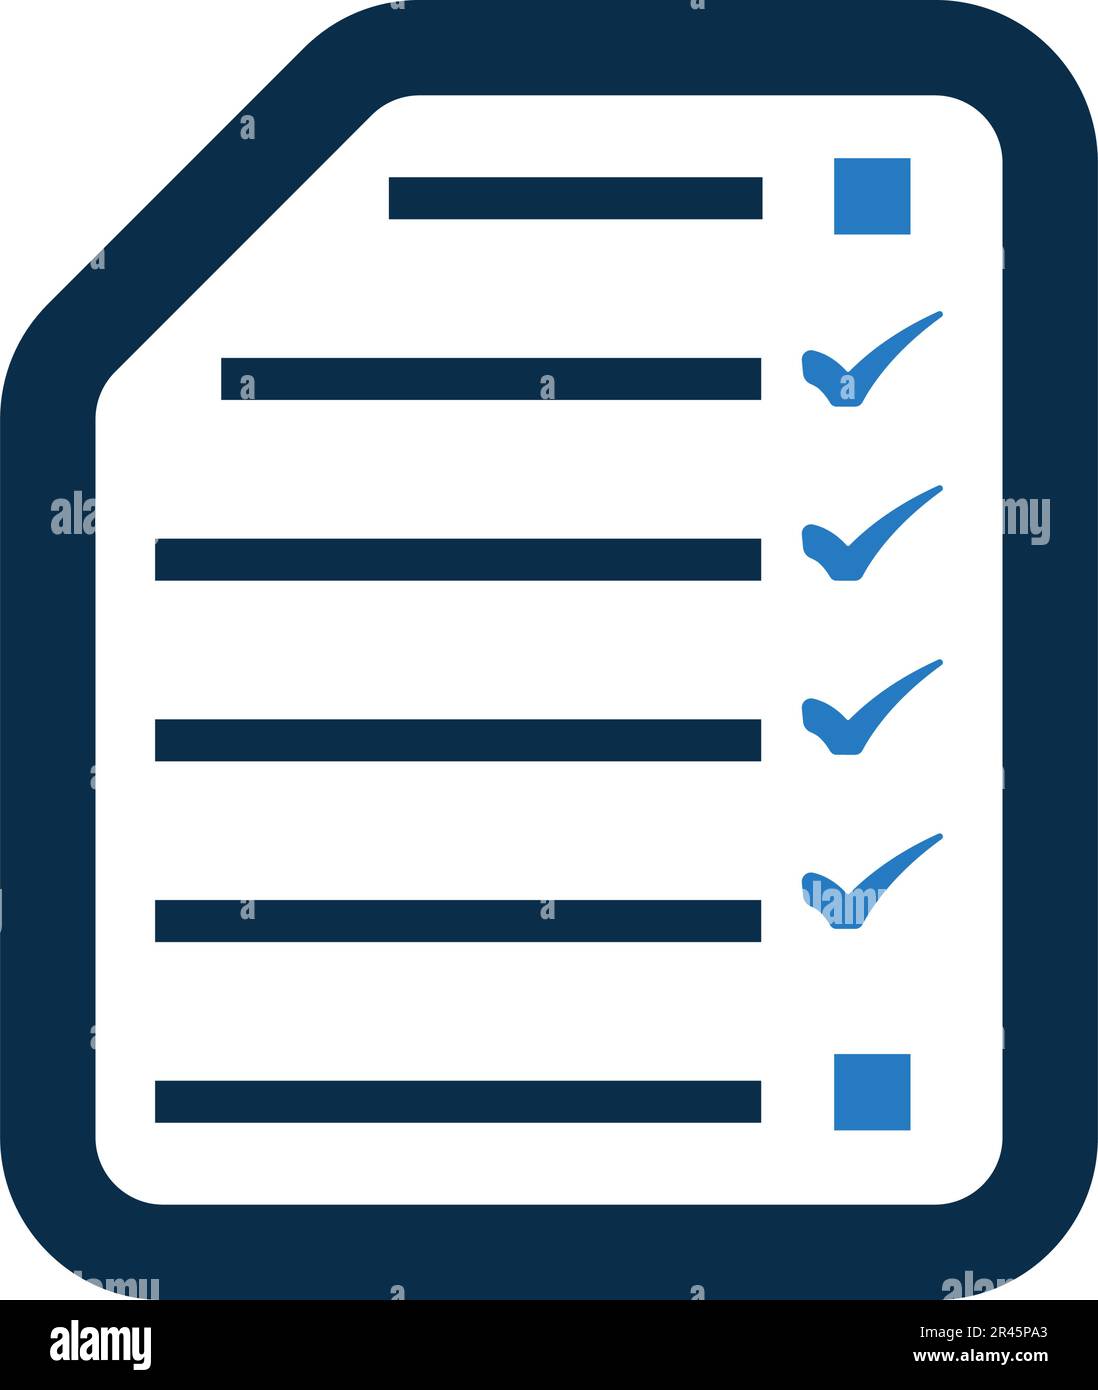 Audit, checklist icon. Commercial use, printed files and presentations, Promotional Materials, web or any type of design project. Stock Vector